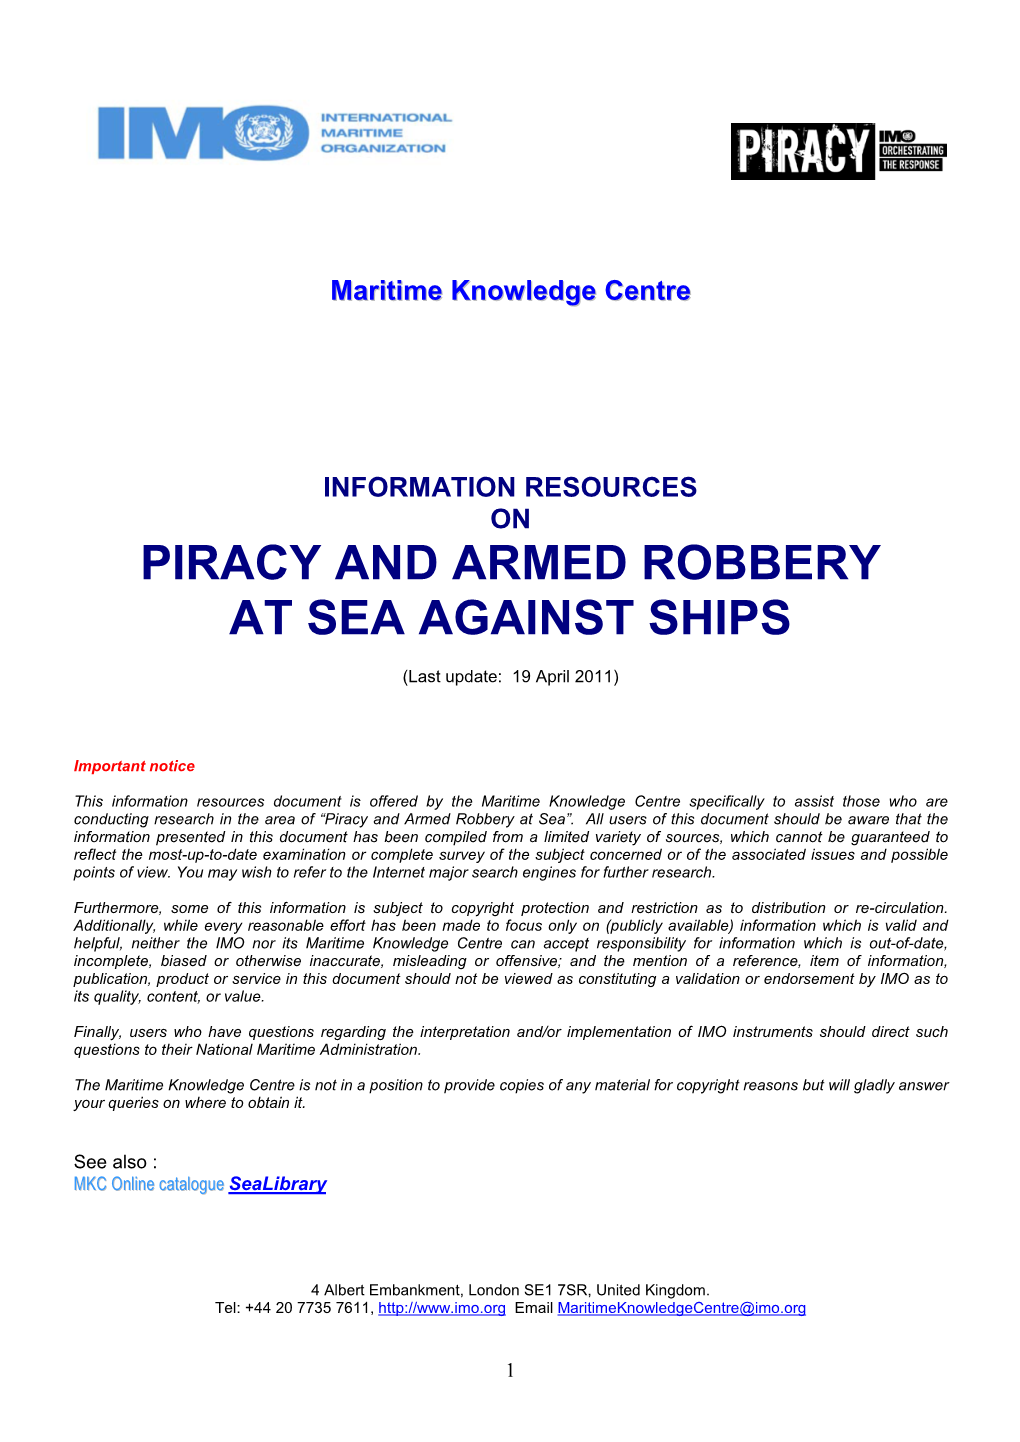 Maritime Knowledge Centre INFORMATION RESOURCES ON